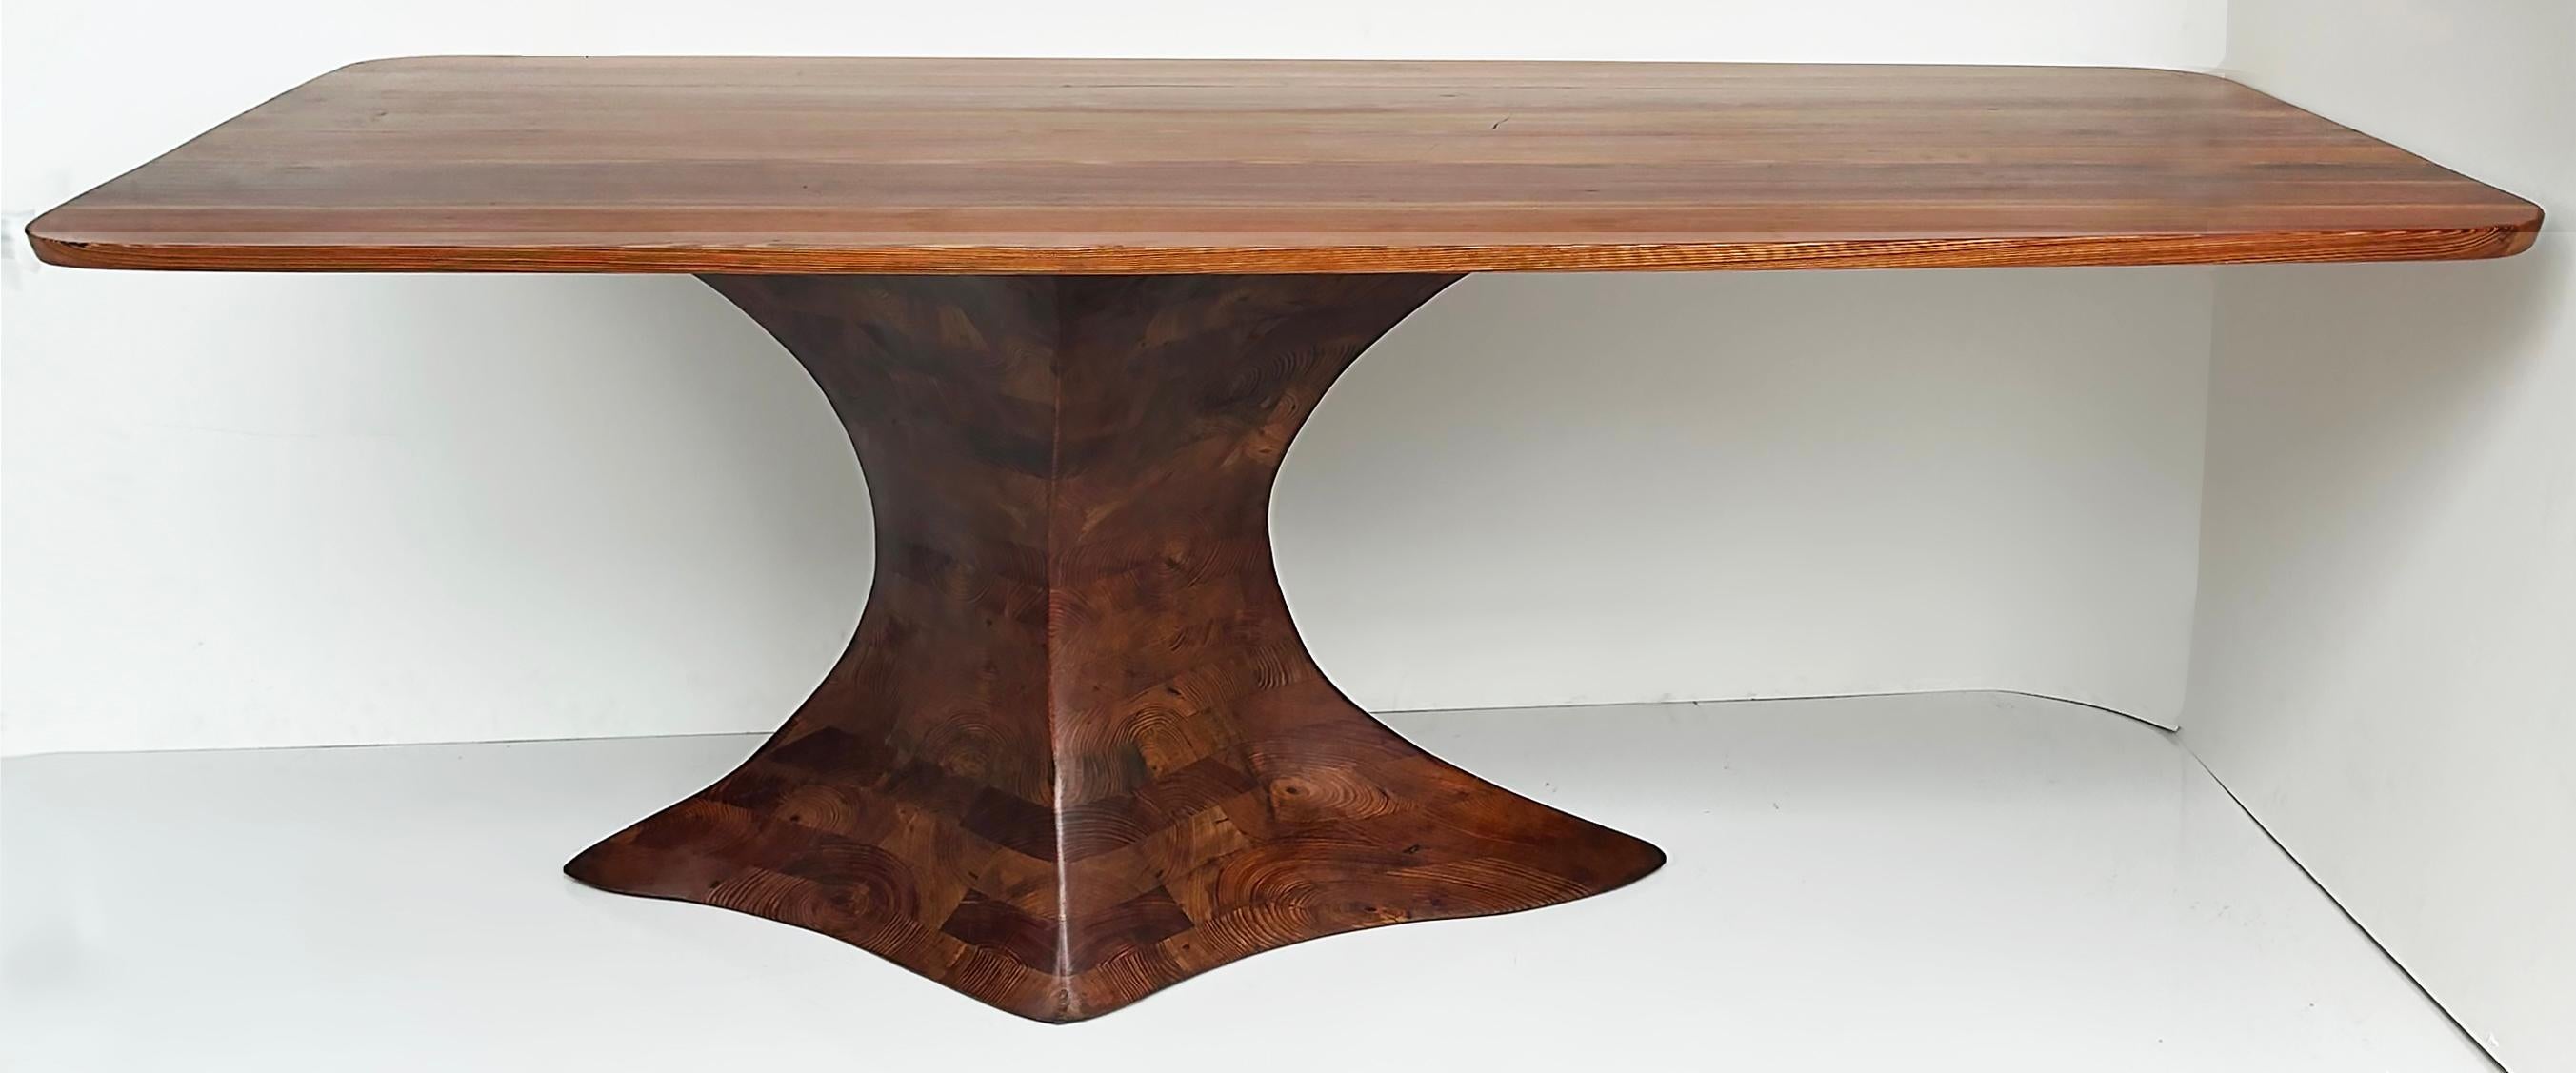 American Dade County Pine Sculptural Studio Dining Table, Ray Pirello Woodworking  For Sale